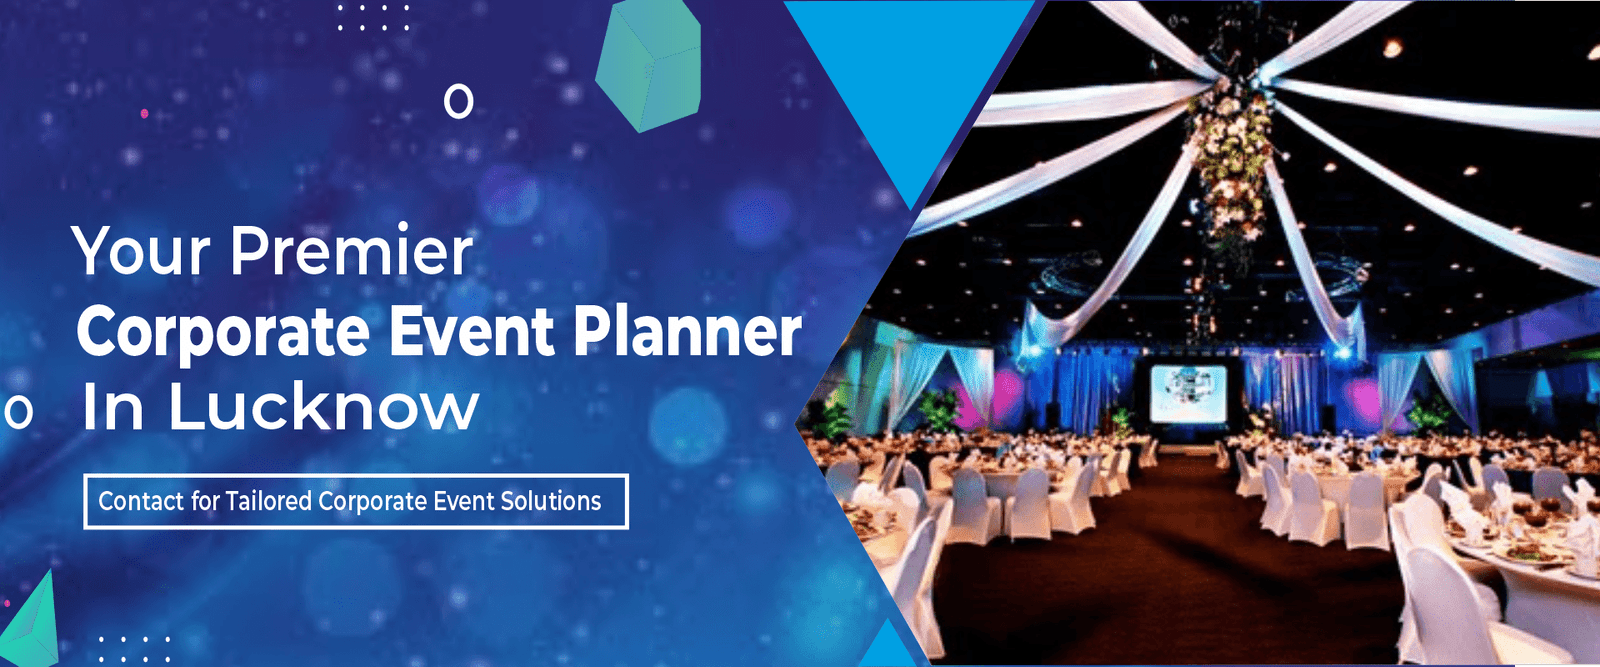 Corporate Event Planner in Lucknow